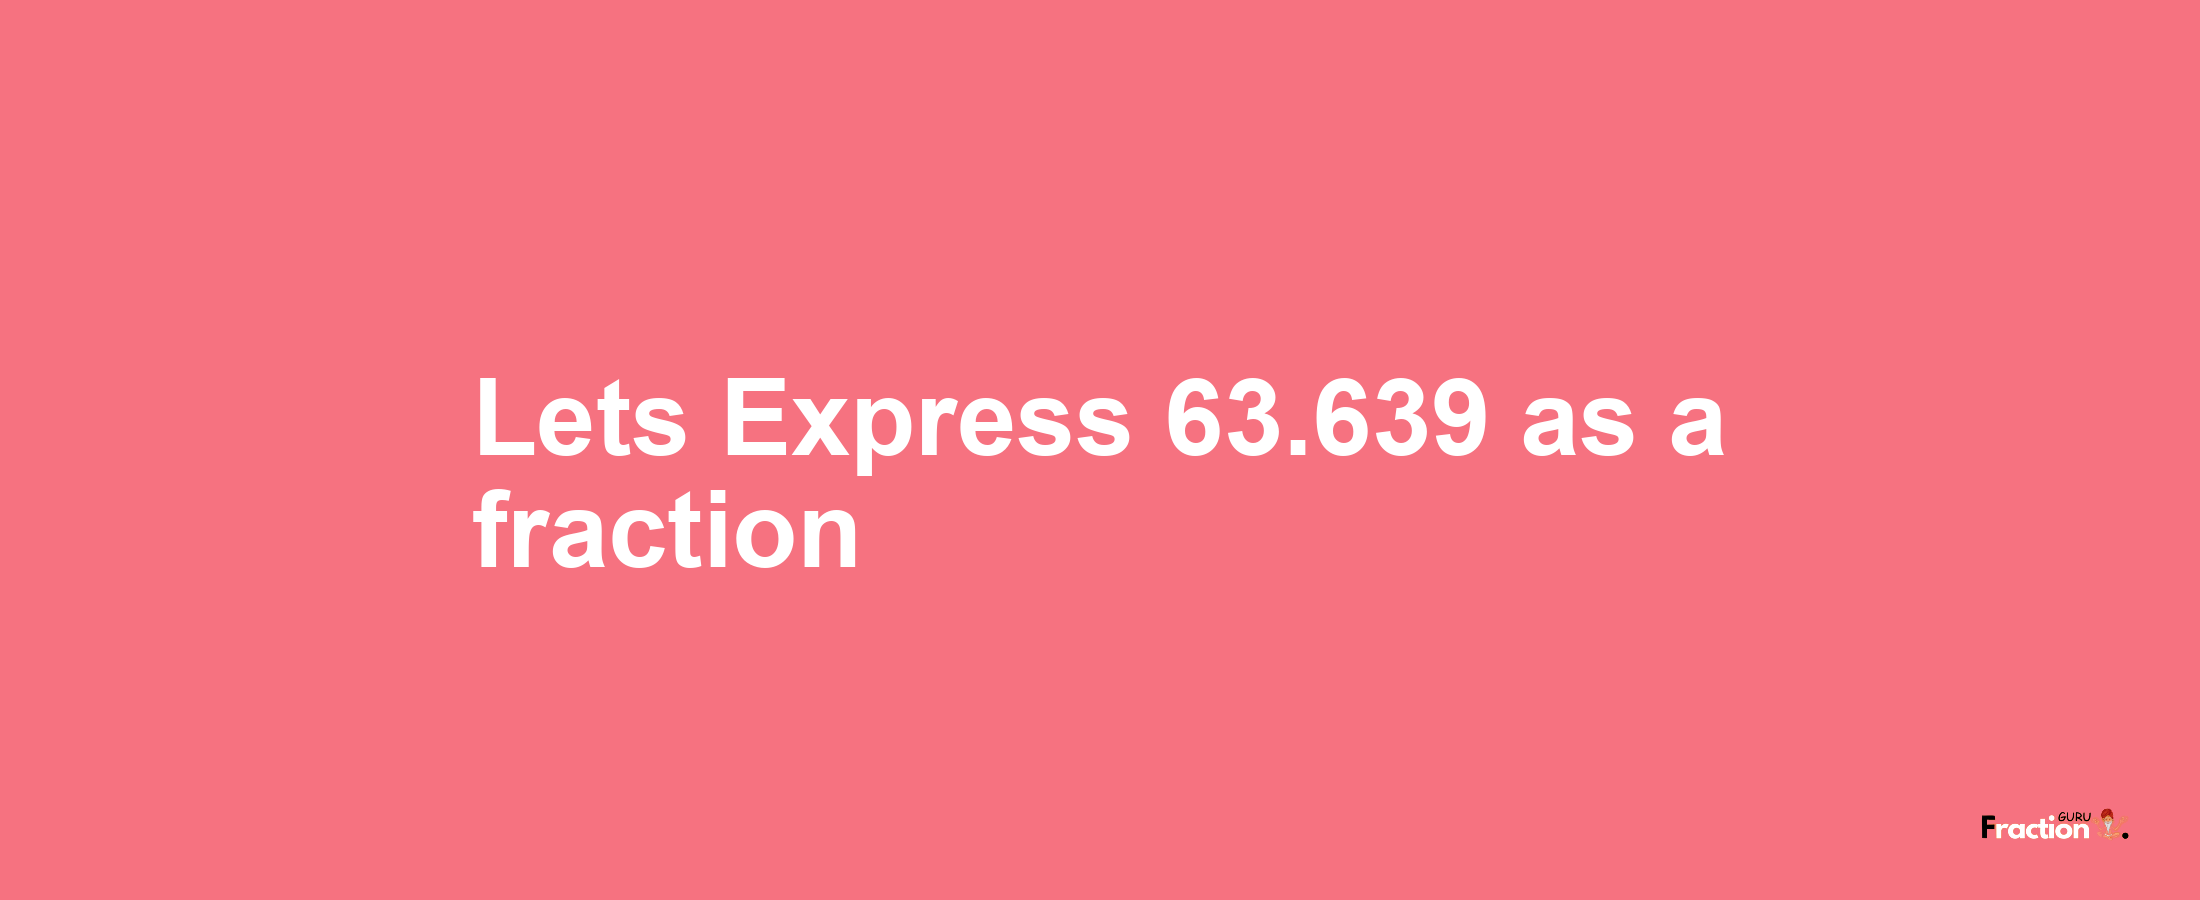 Lets Express 63.639 as afraction